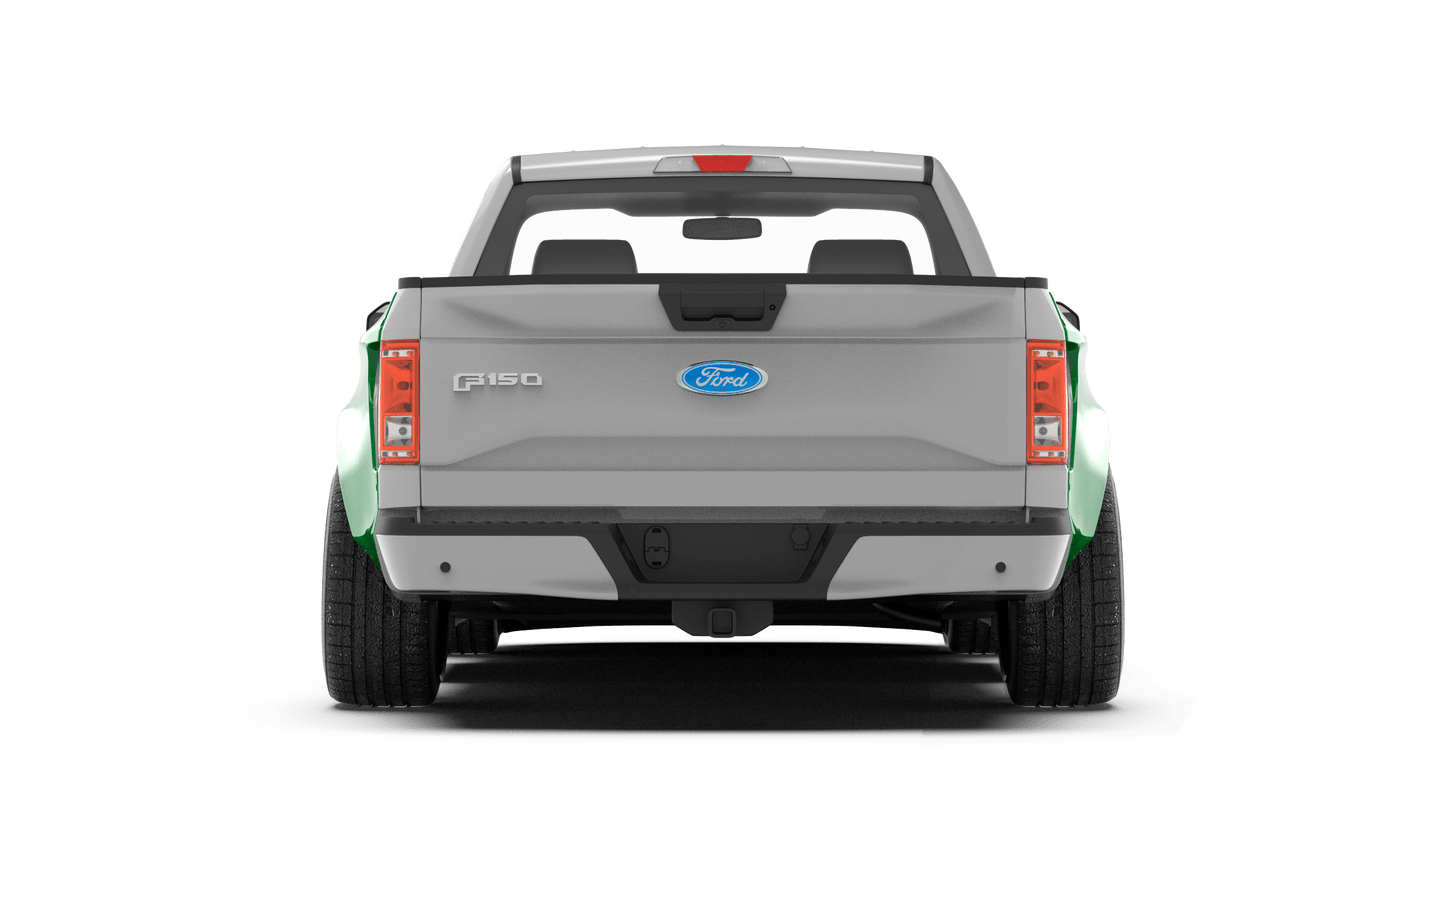 Clinched Ford F-150 (6.5 bed) Widebody Kit